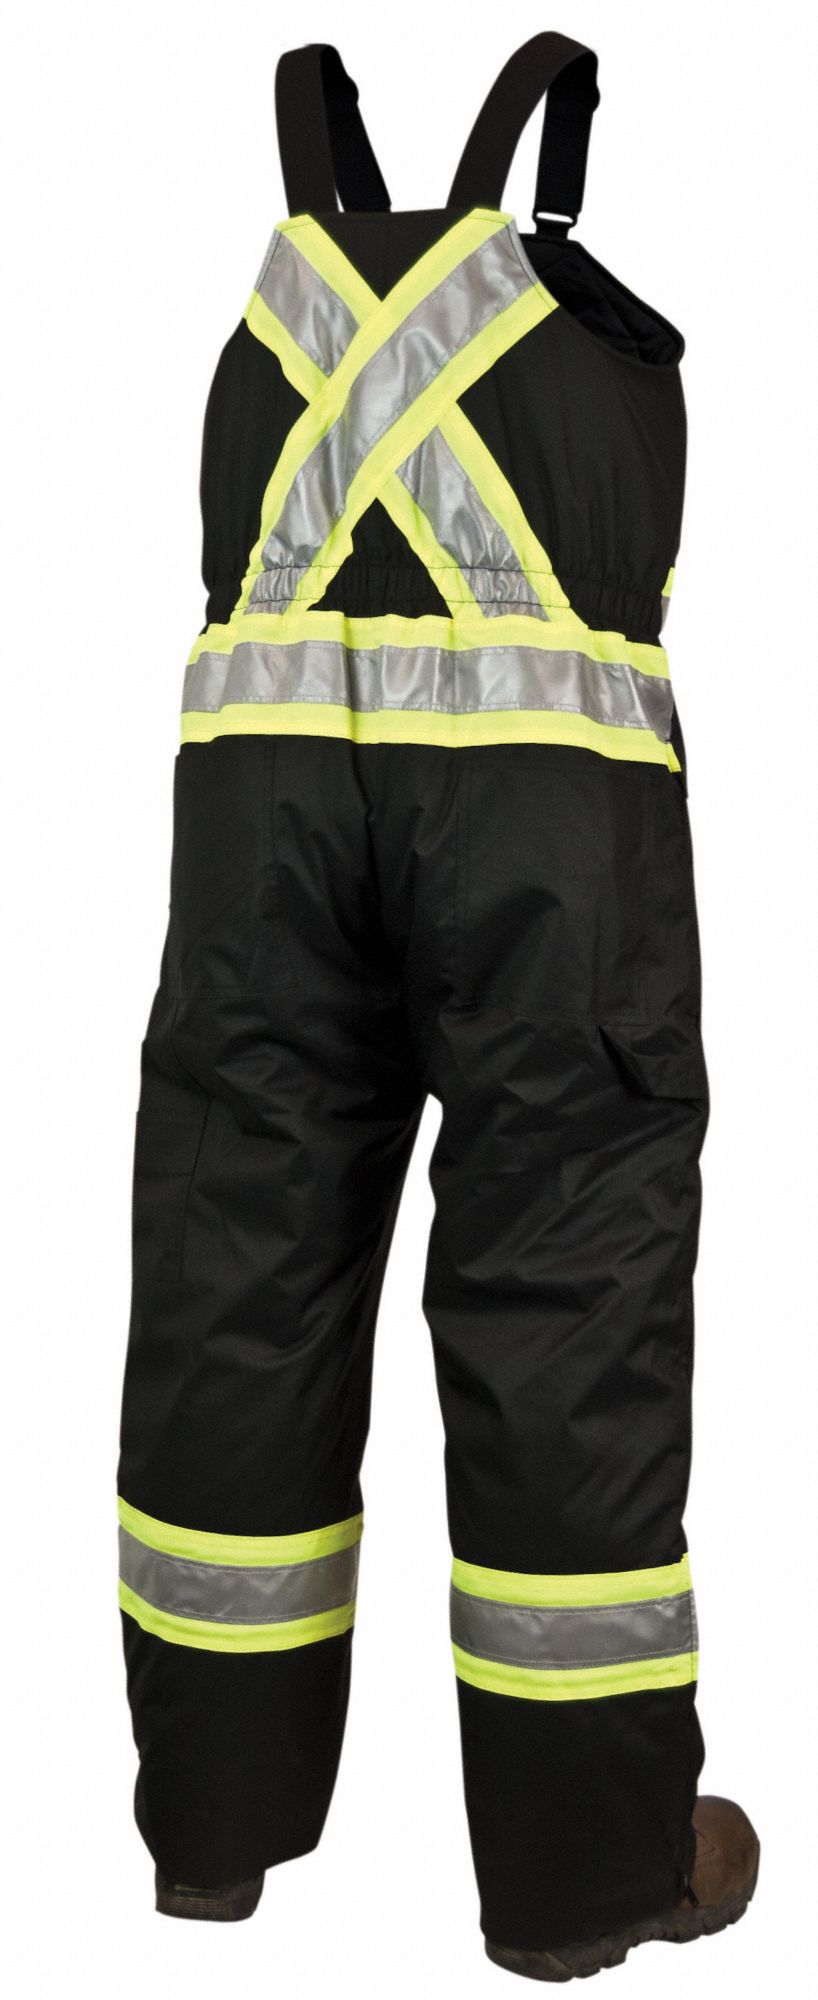 V2060580-2XL Reflective Stripe Hip-to-Ankle Zipper 4 Pockets Pioneer Heavy-Duty Insulated Overall Bib Work Pants 2XL Blue